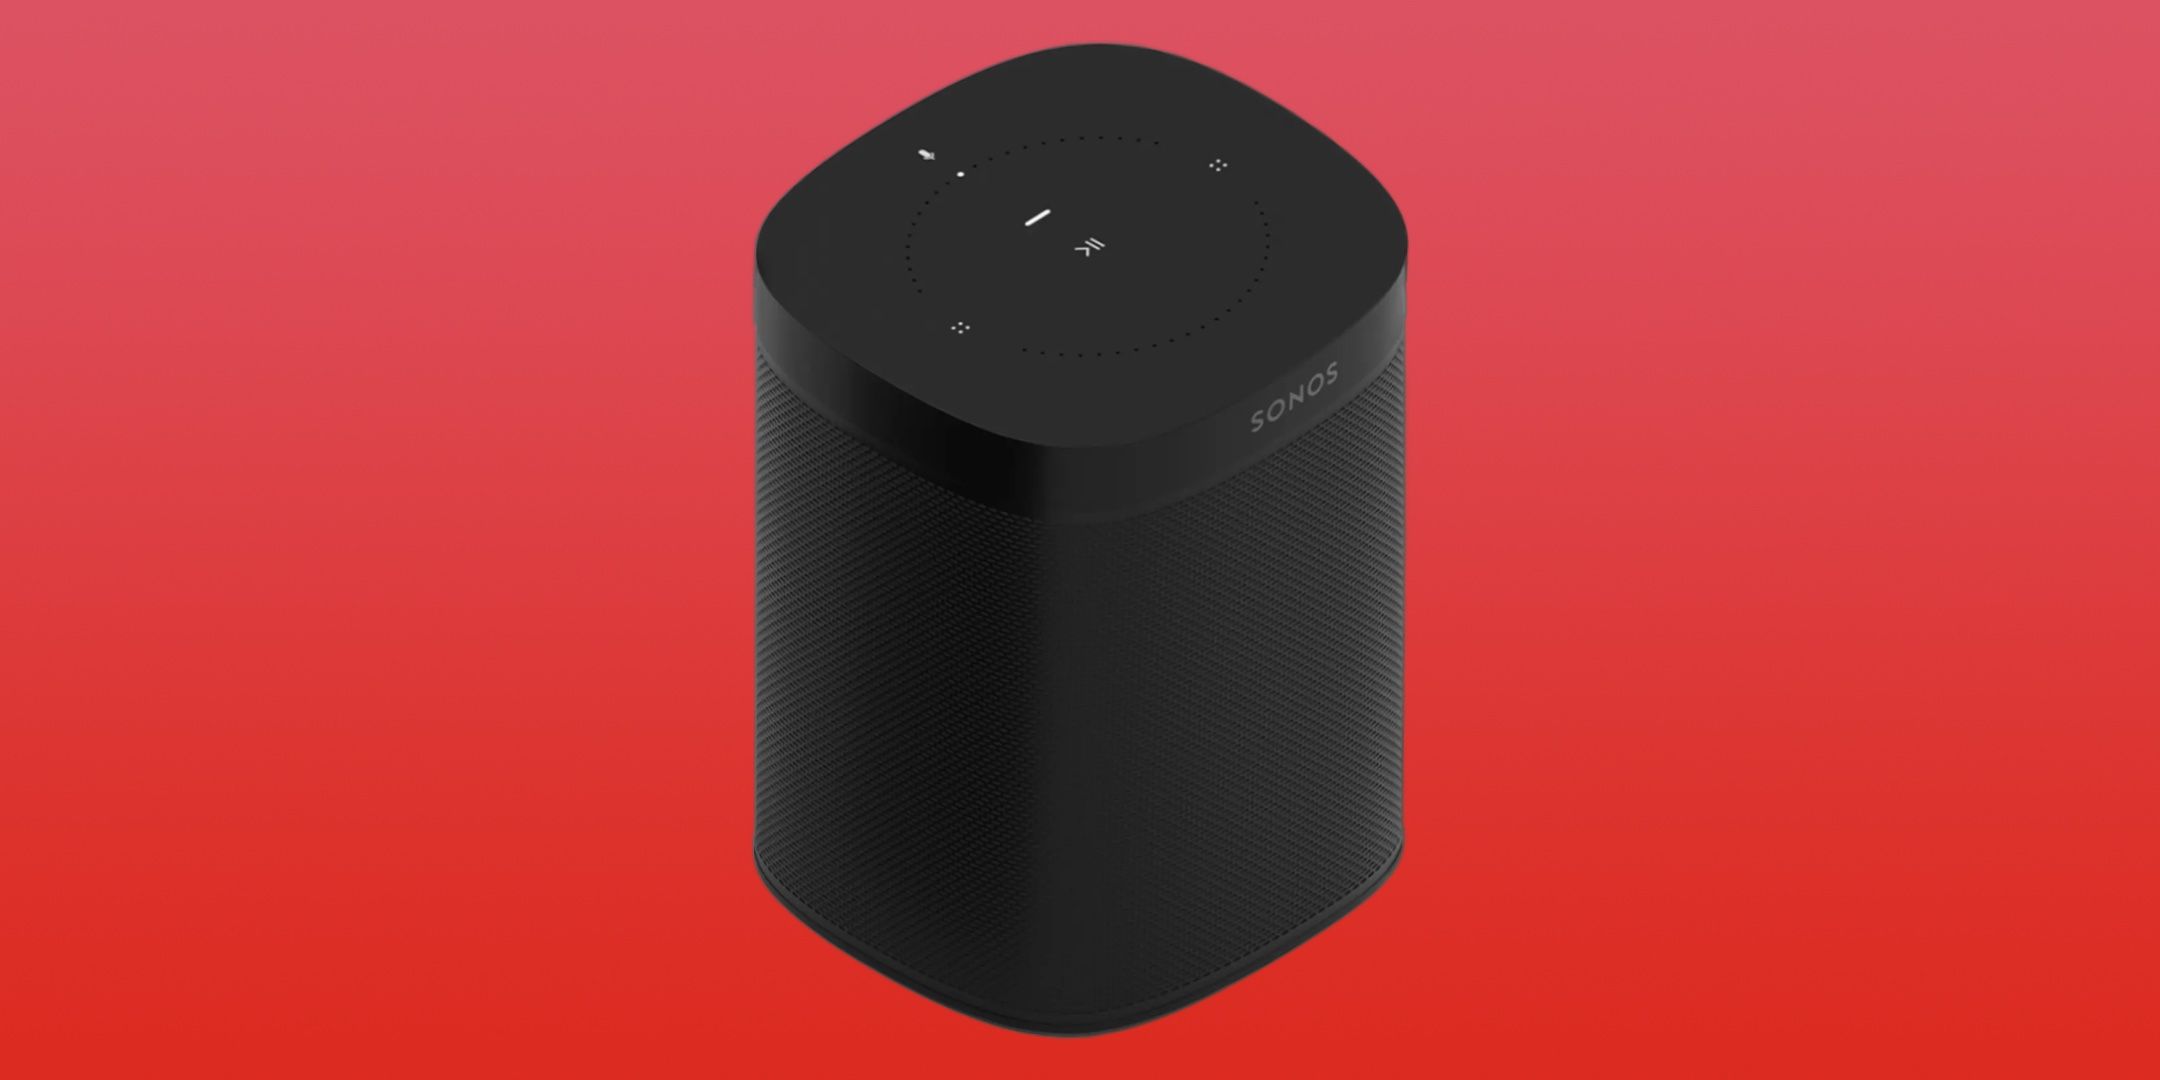 Sonos One with the Sonos Voice Assistant